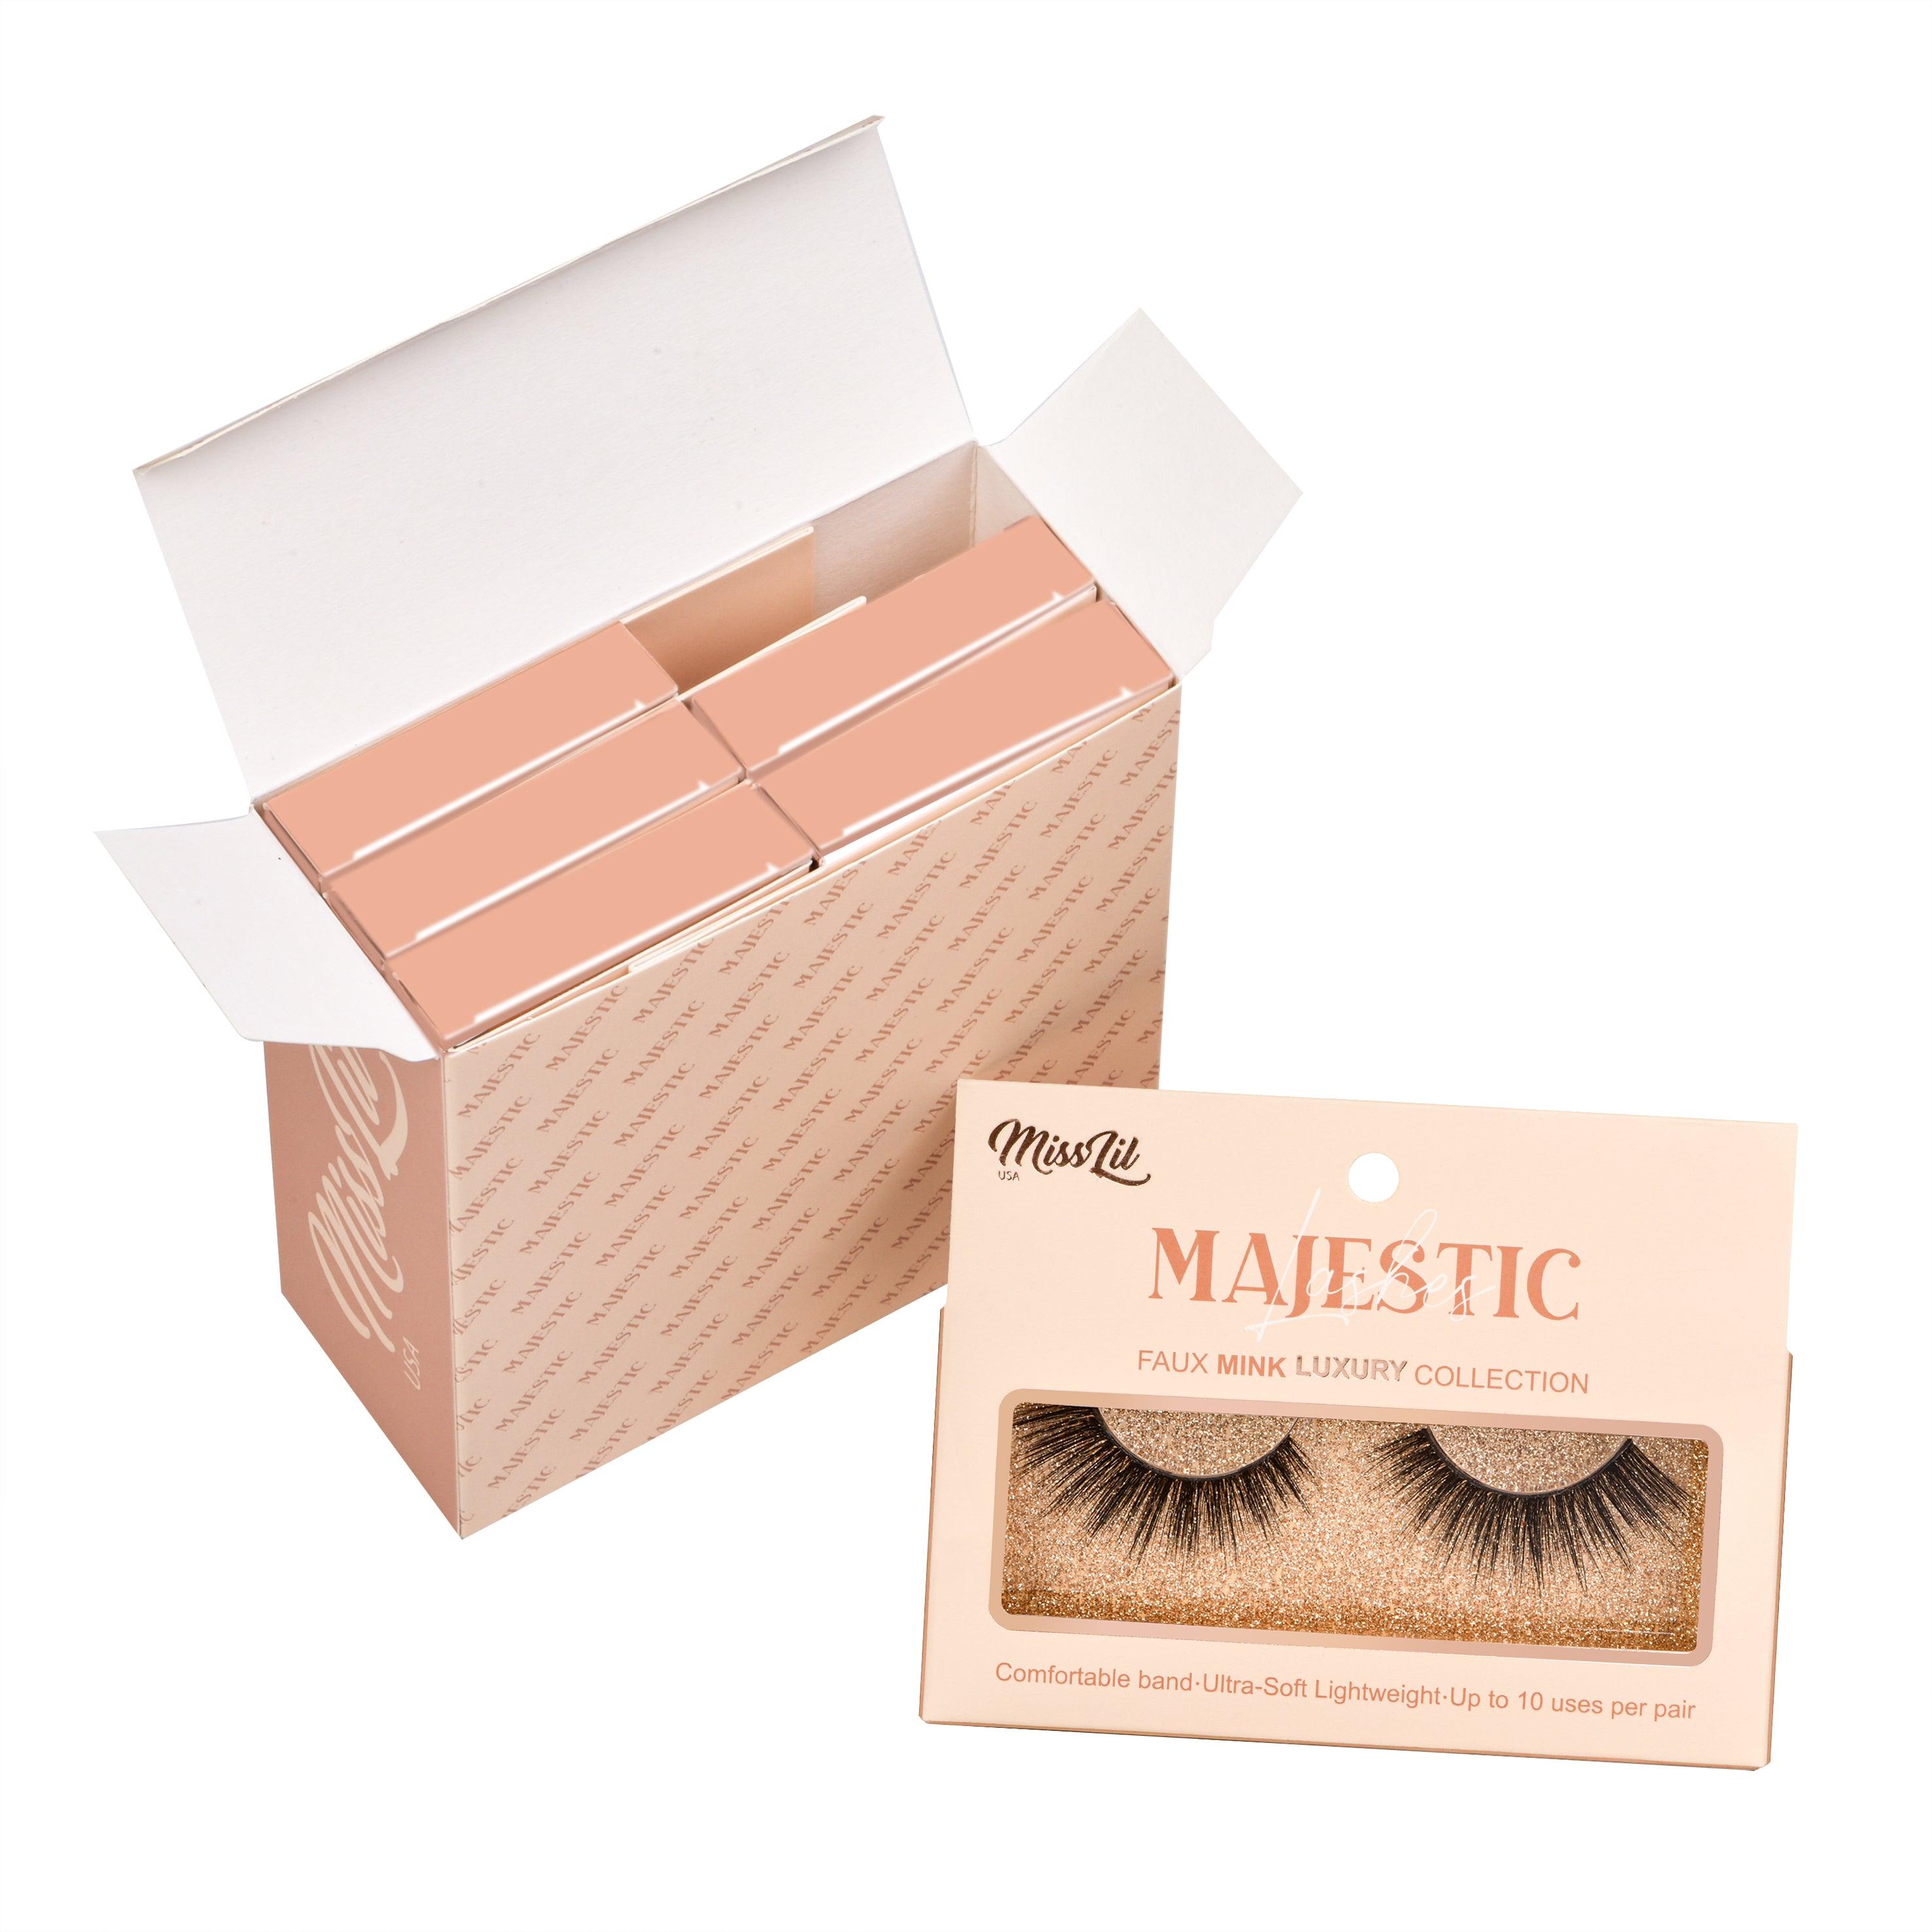 1-PAIR LASHES-MAJESTIC COLLECTION #25 (PACK OF 3) - Miss Lil USA